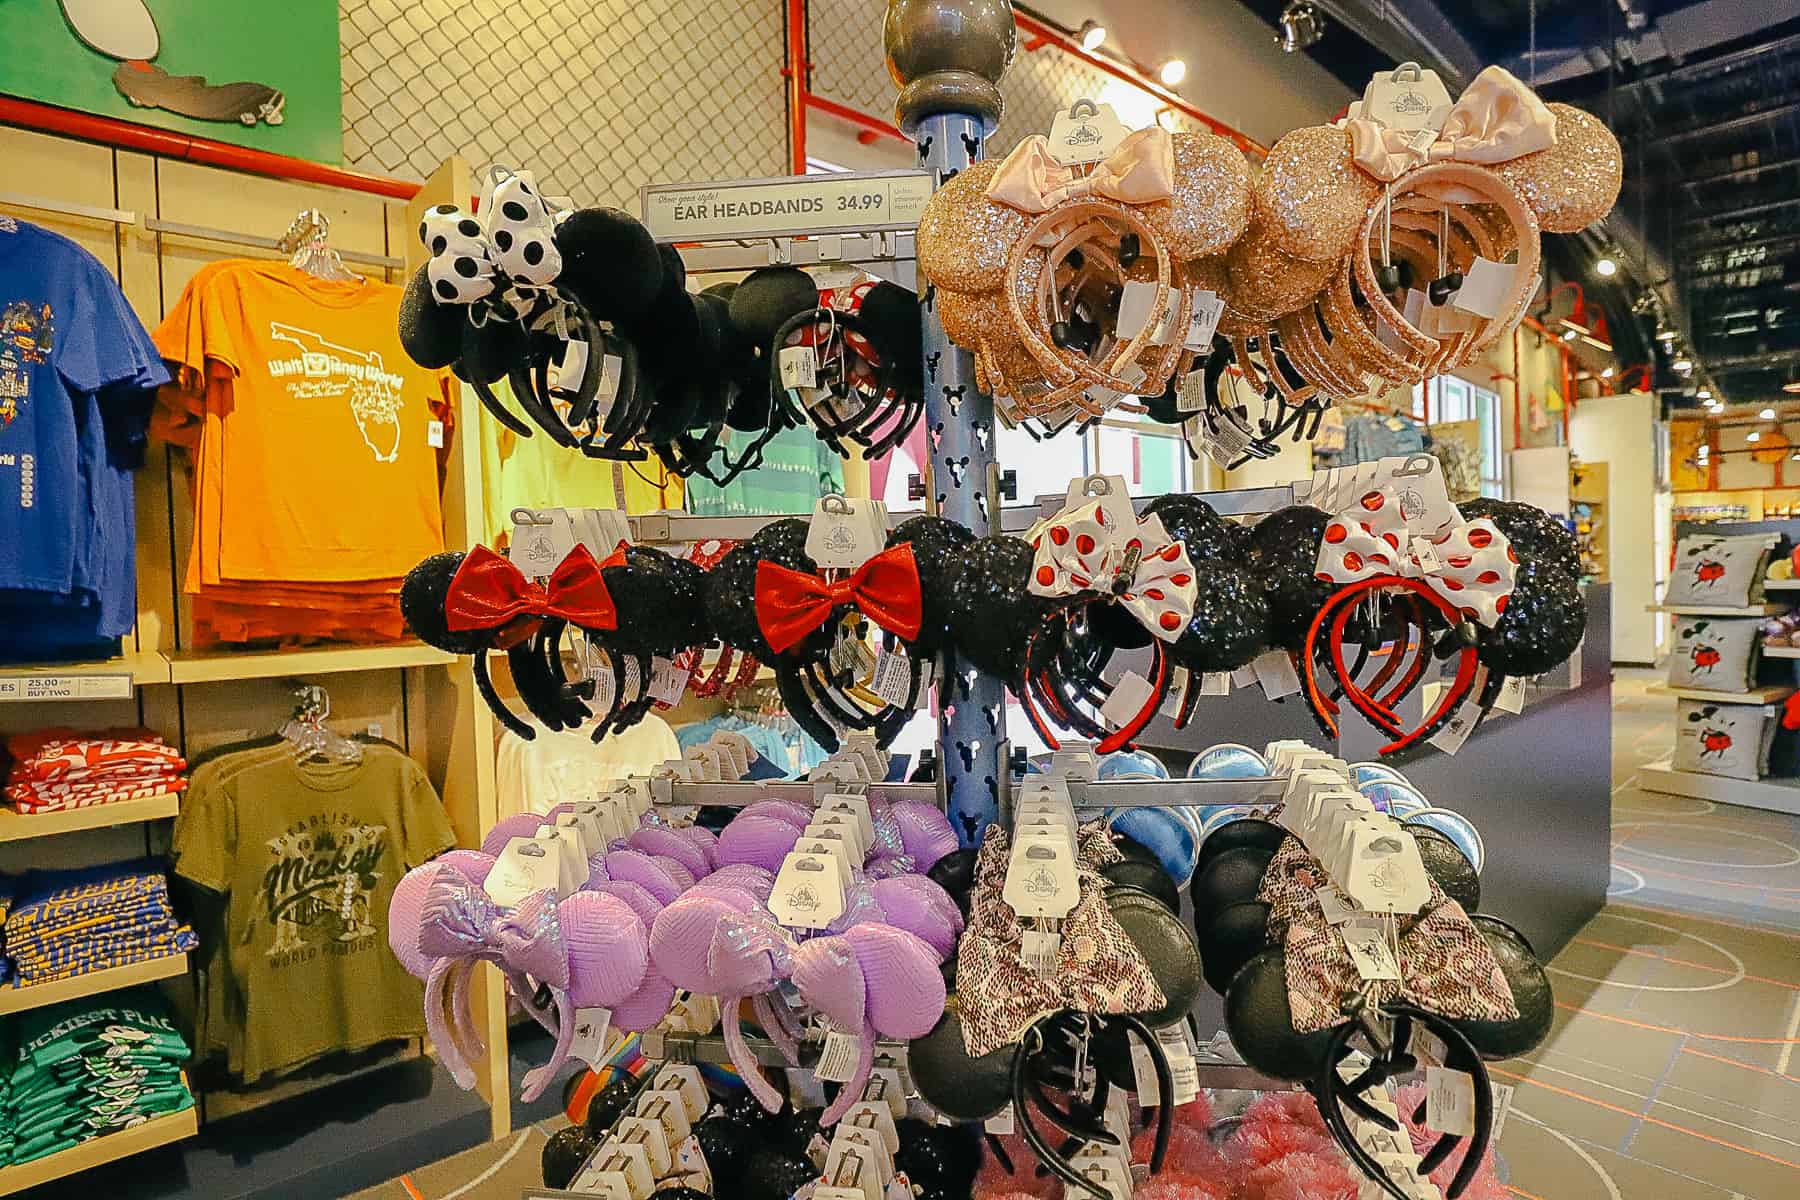 a display with Minnie Ears at the All-Star Sports Gift Shop